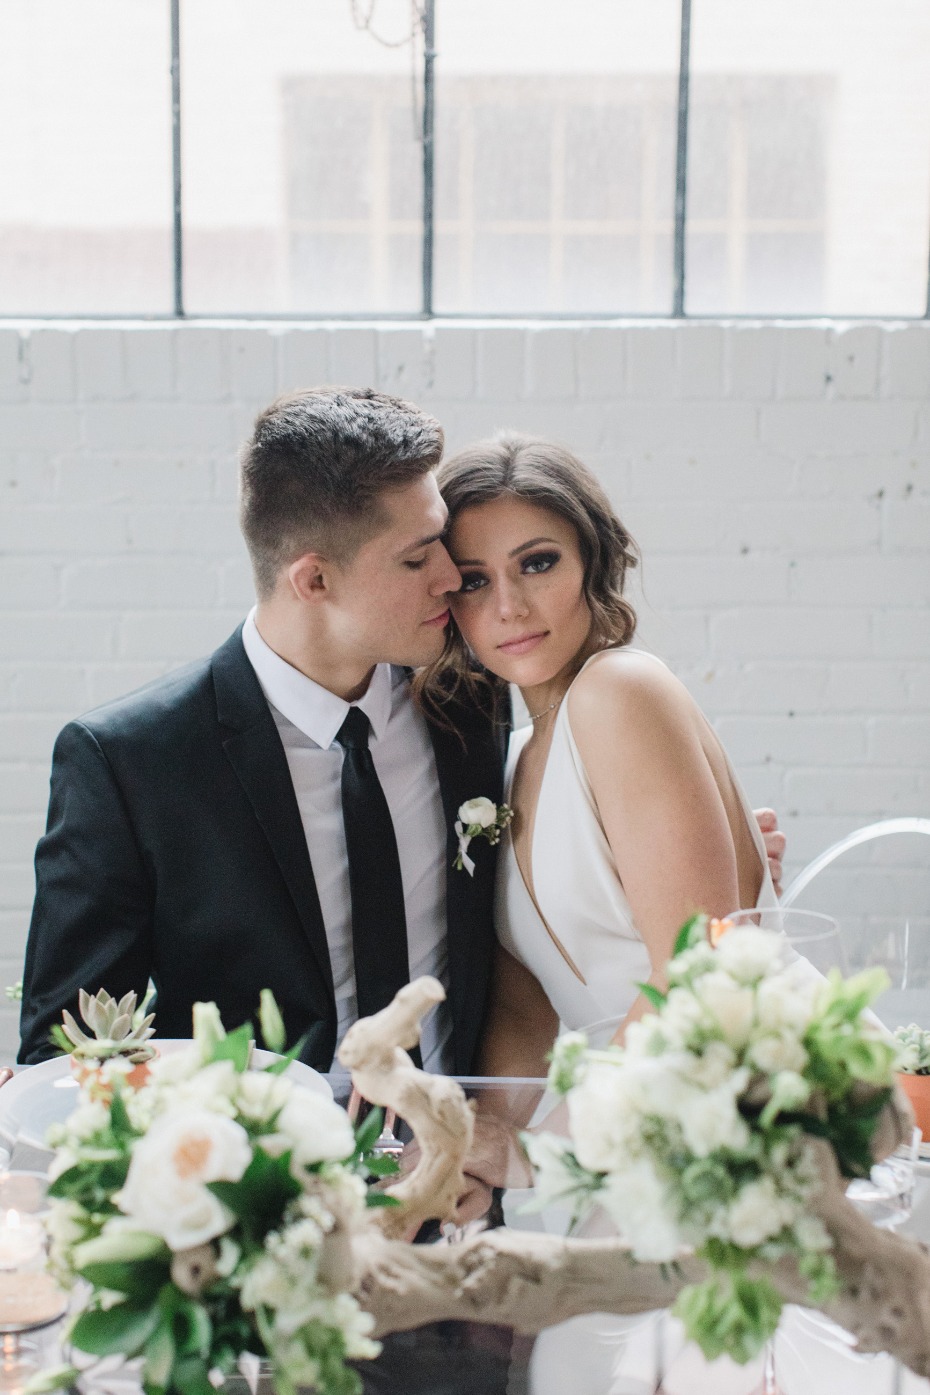 Gorgeous couple and a mod wedding